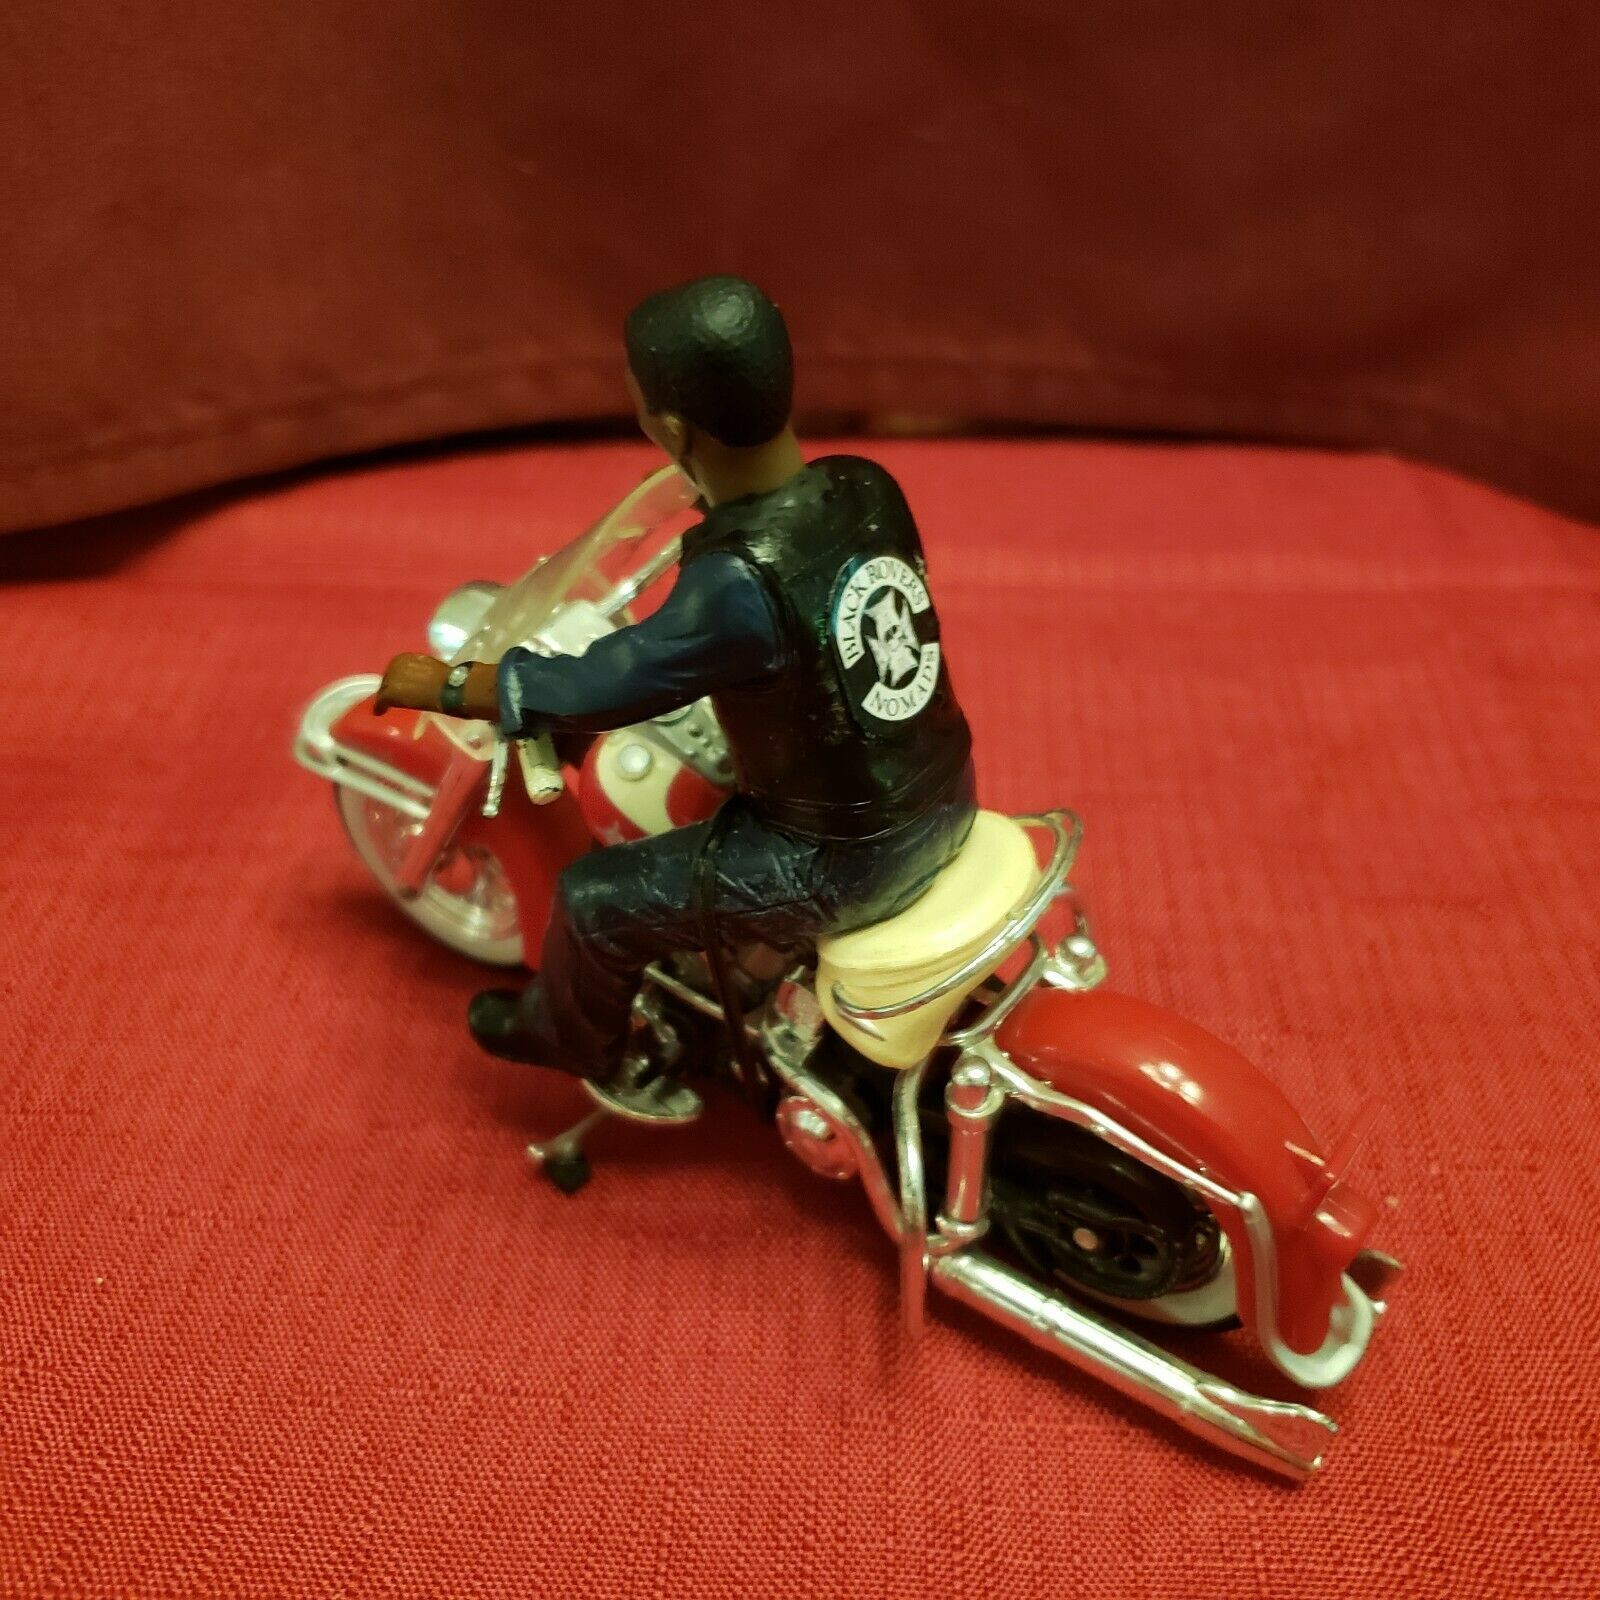 1:18 "black Rovers Nomads"   Bike Models With Male Rider Figurine ~ Custom Made!